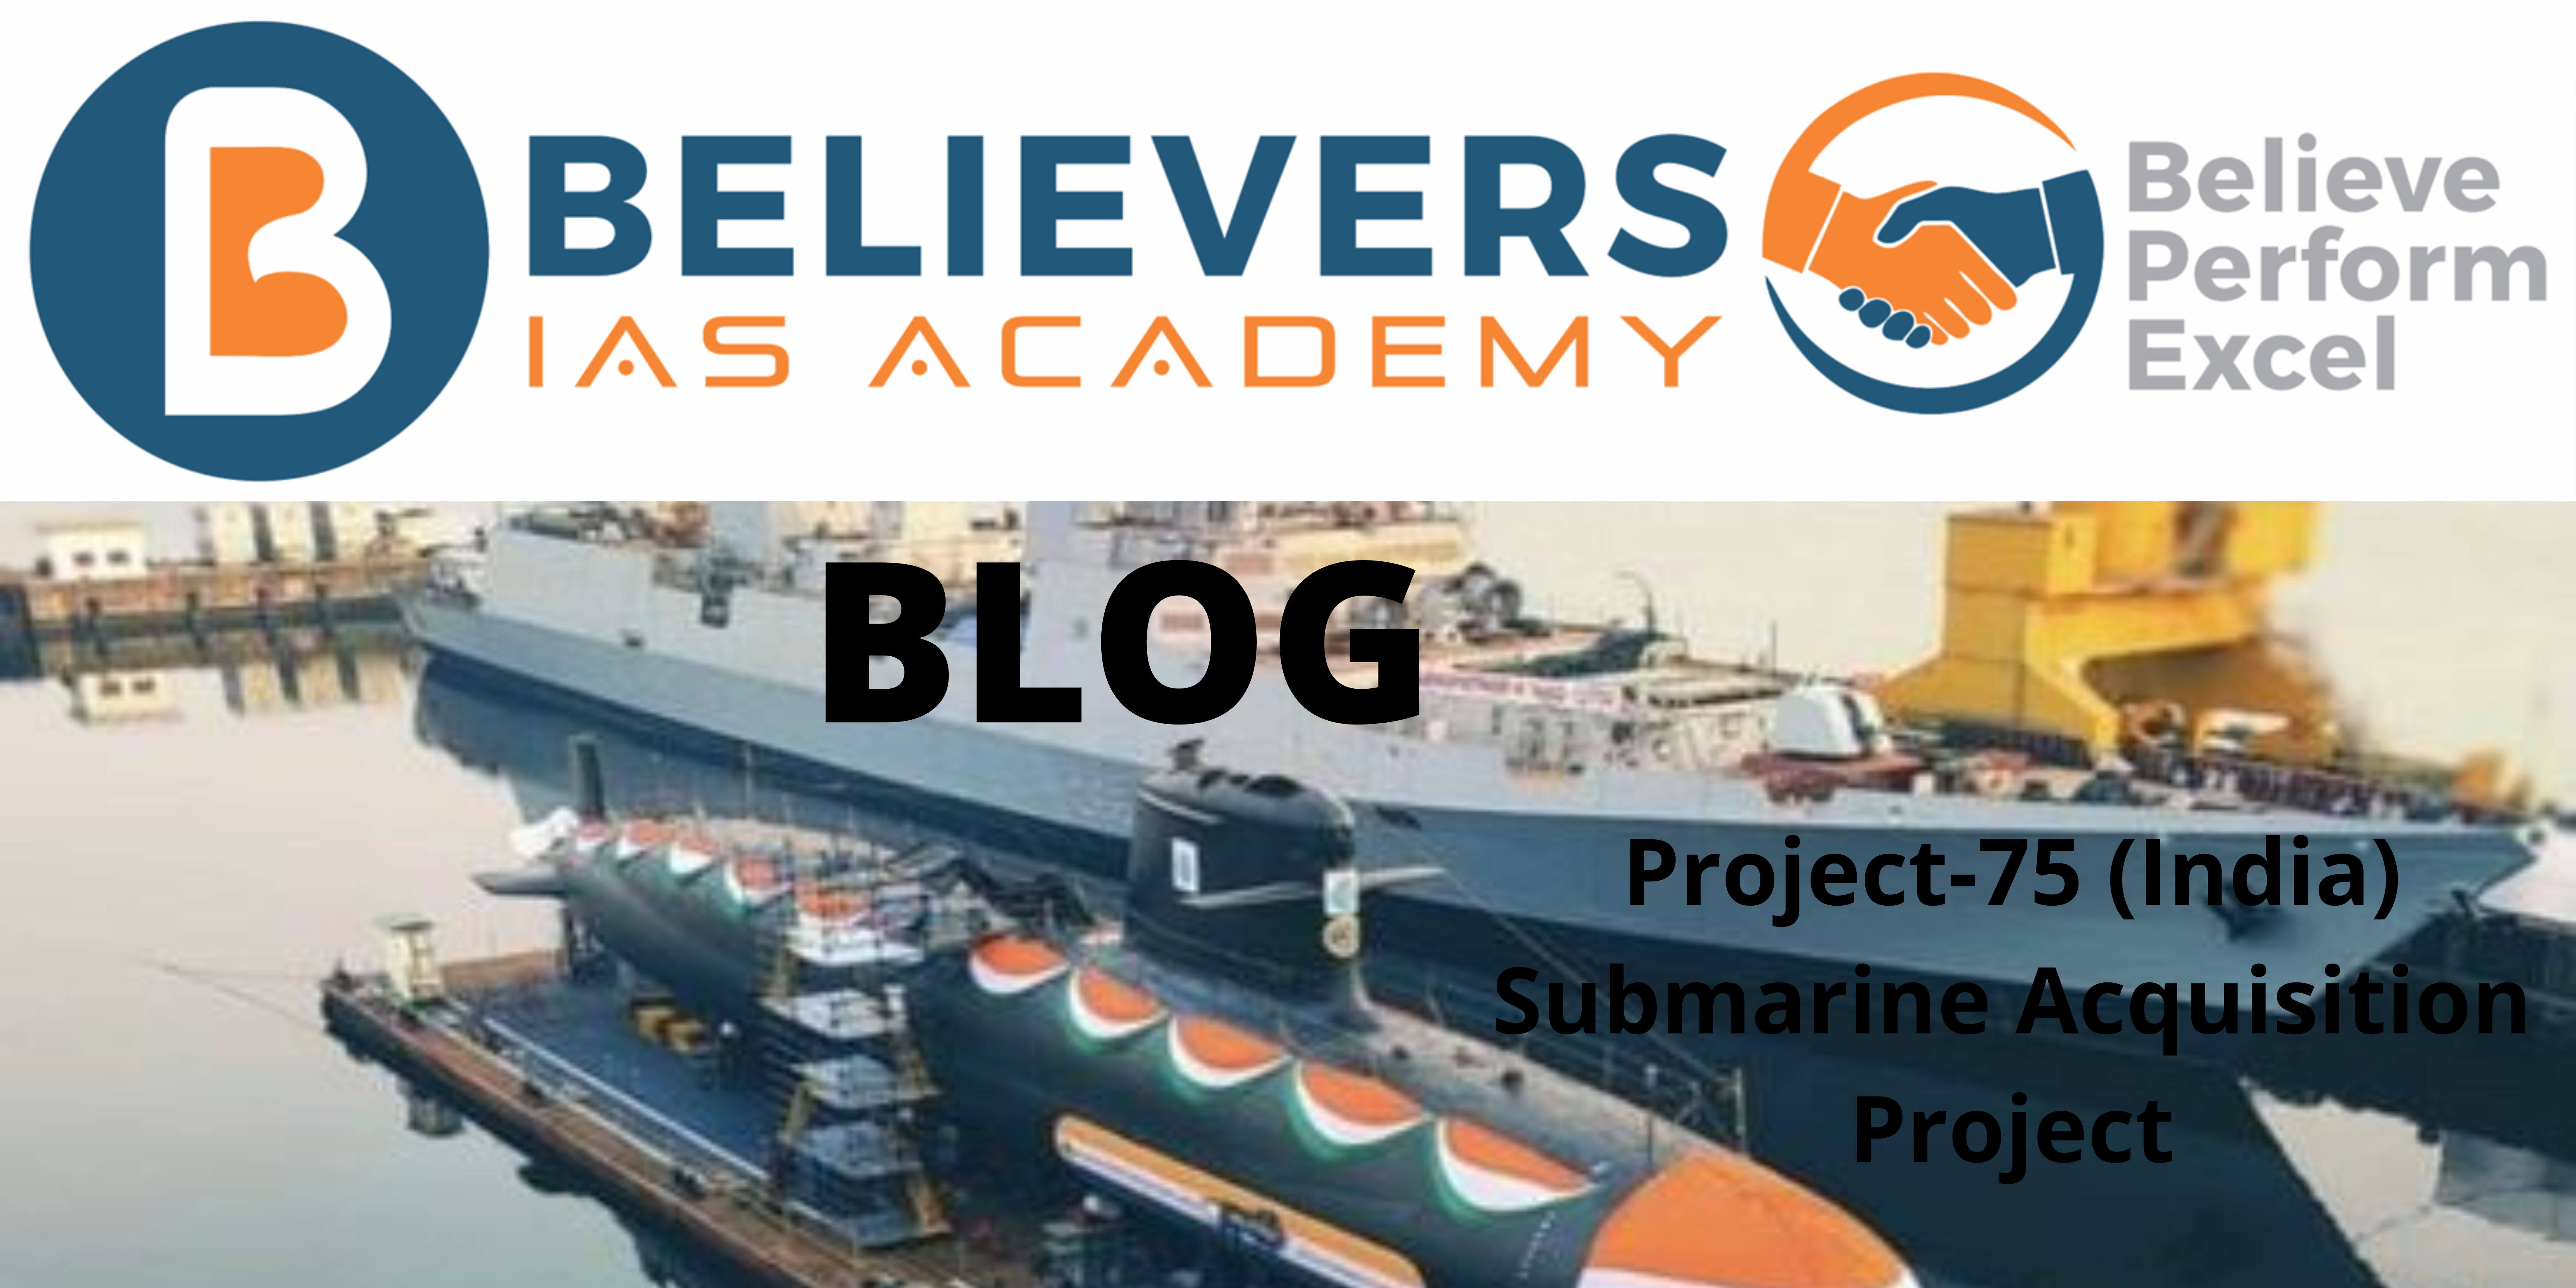 Project-75 (India) submarine acquisition project